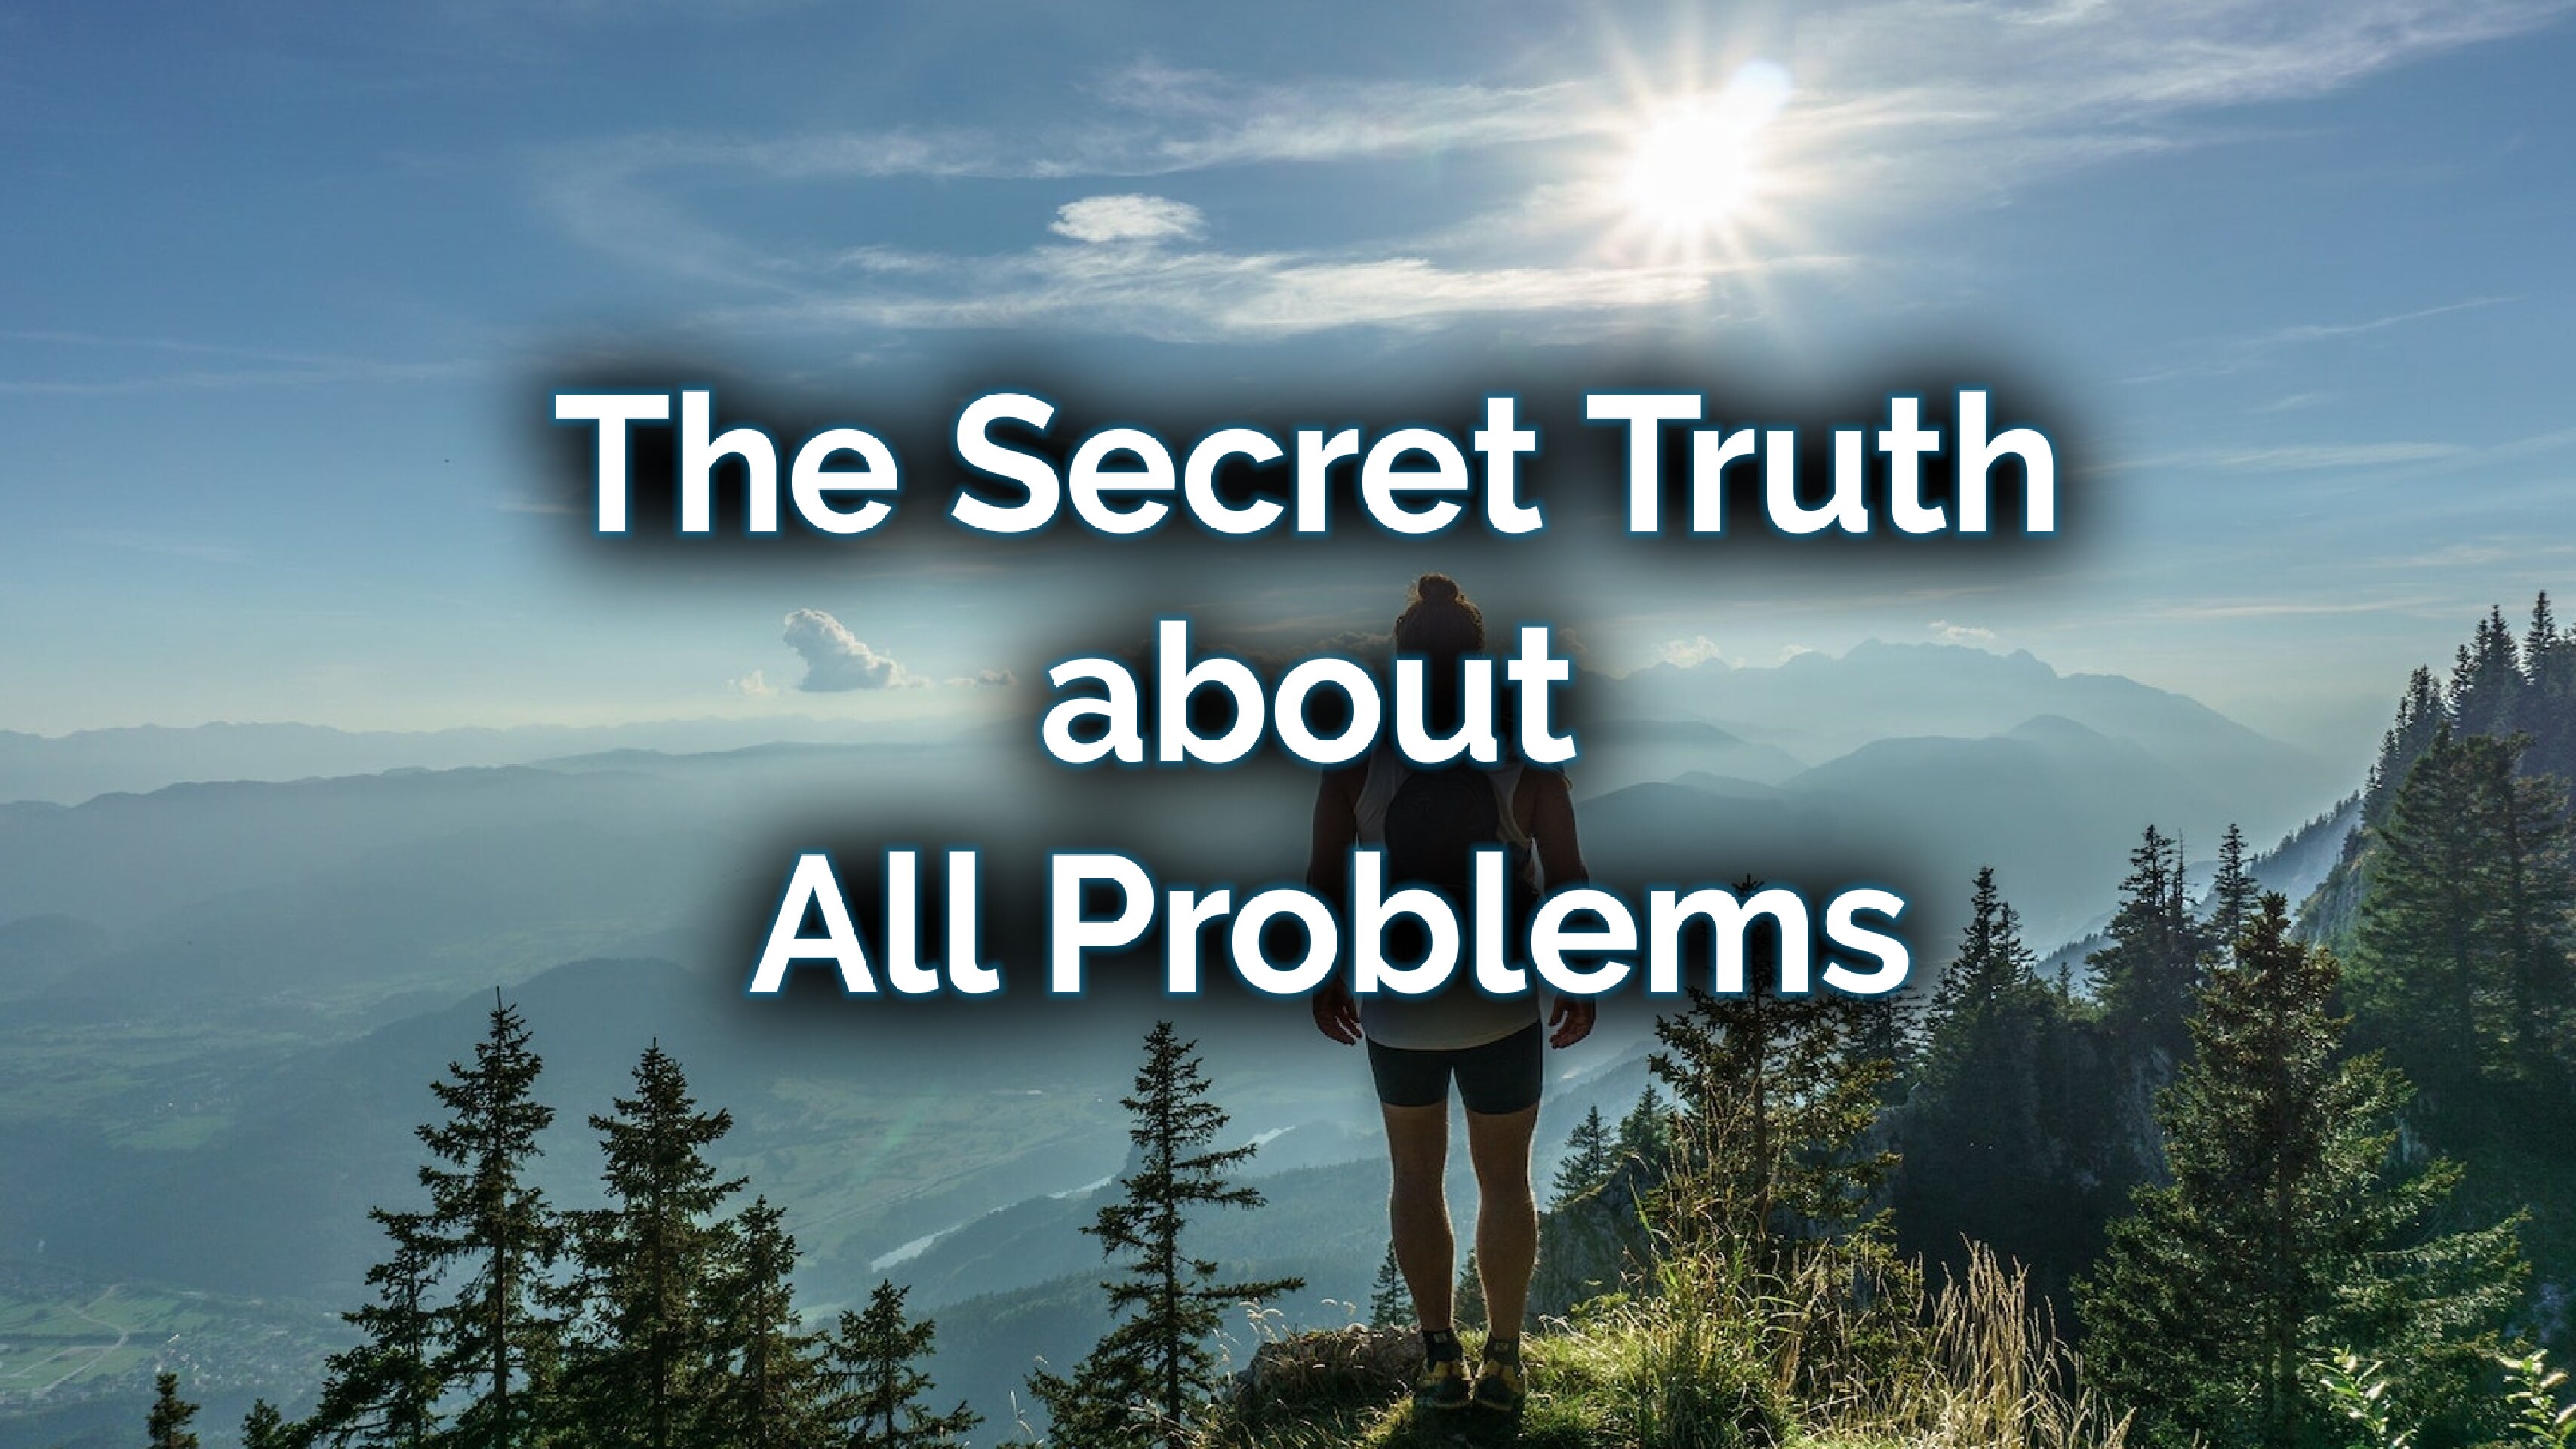 The Secret Truth about All Problems